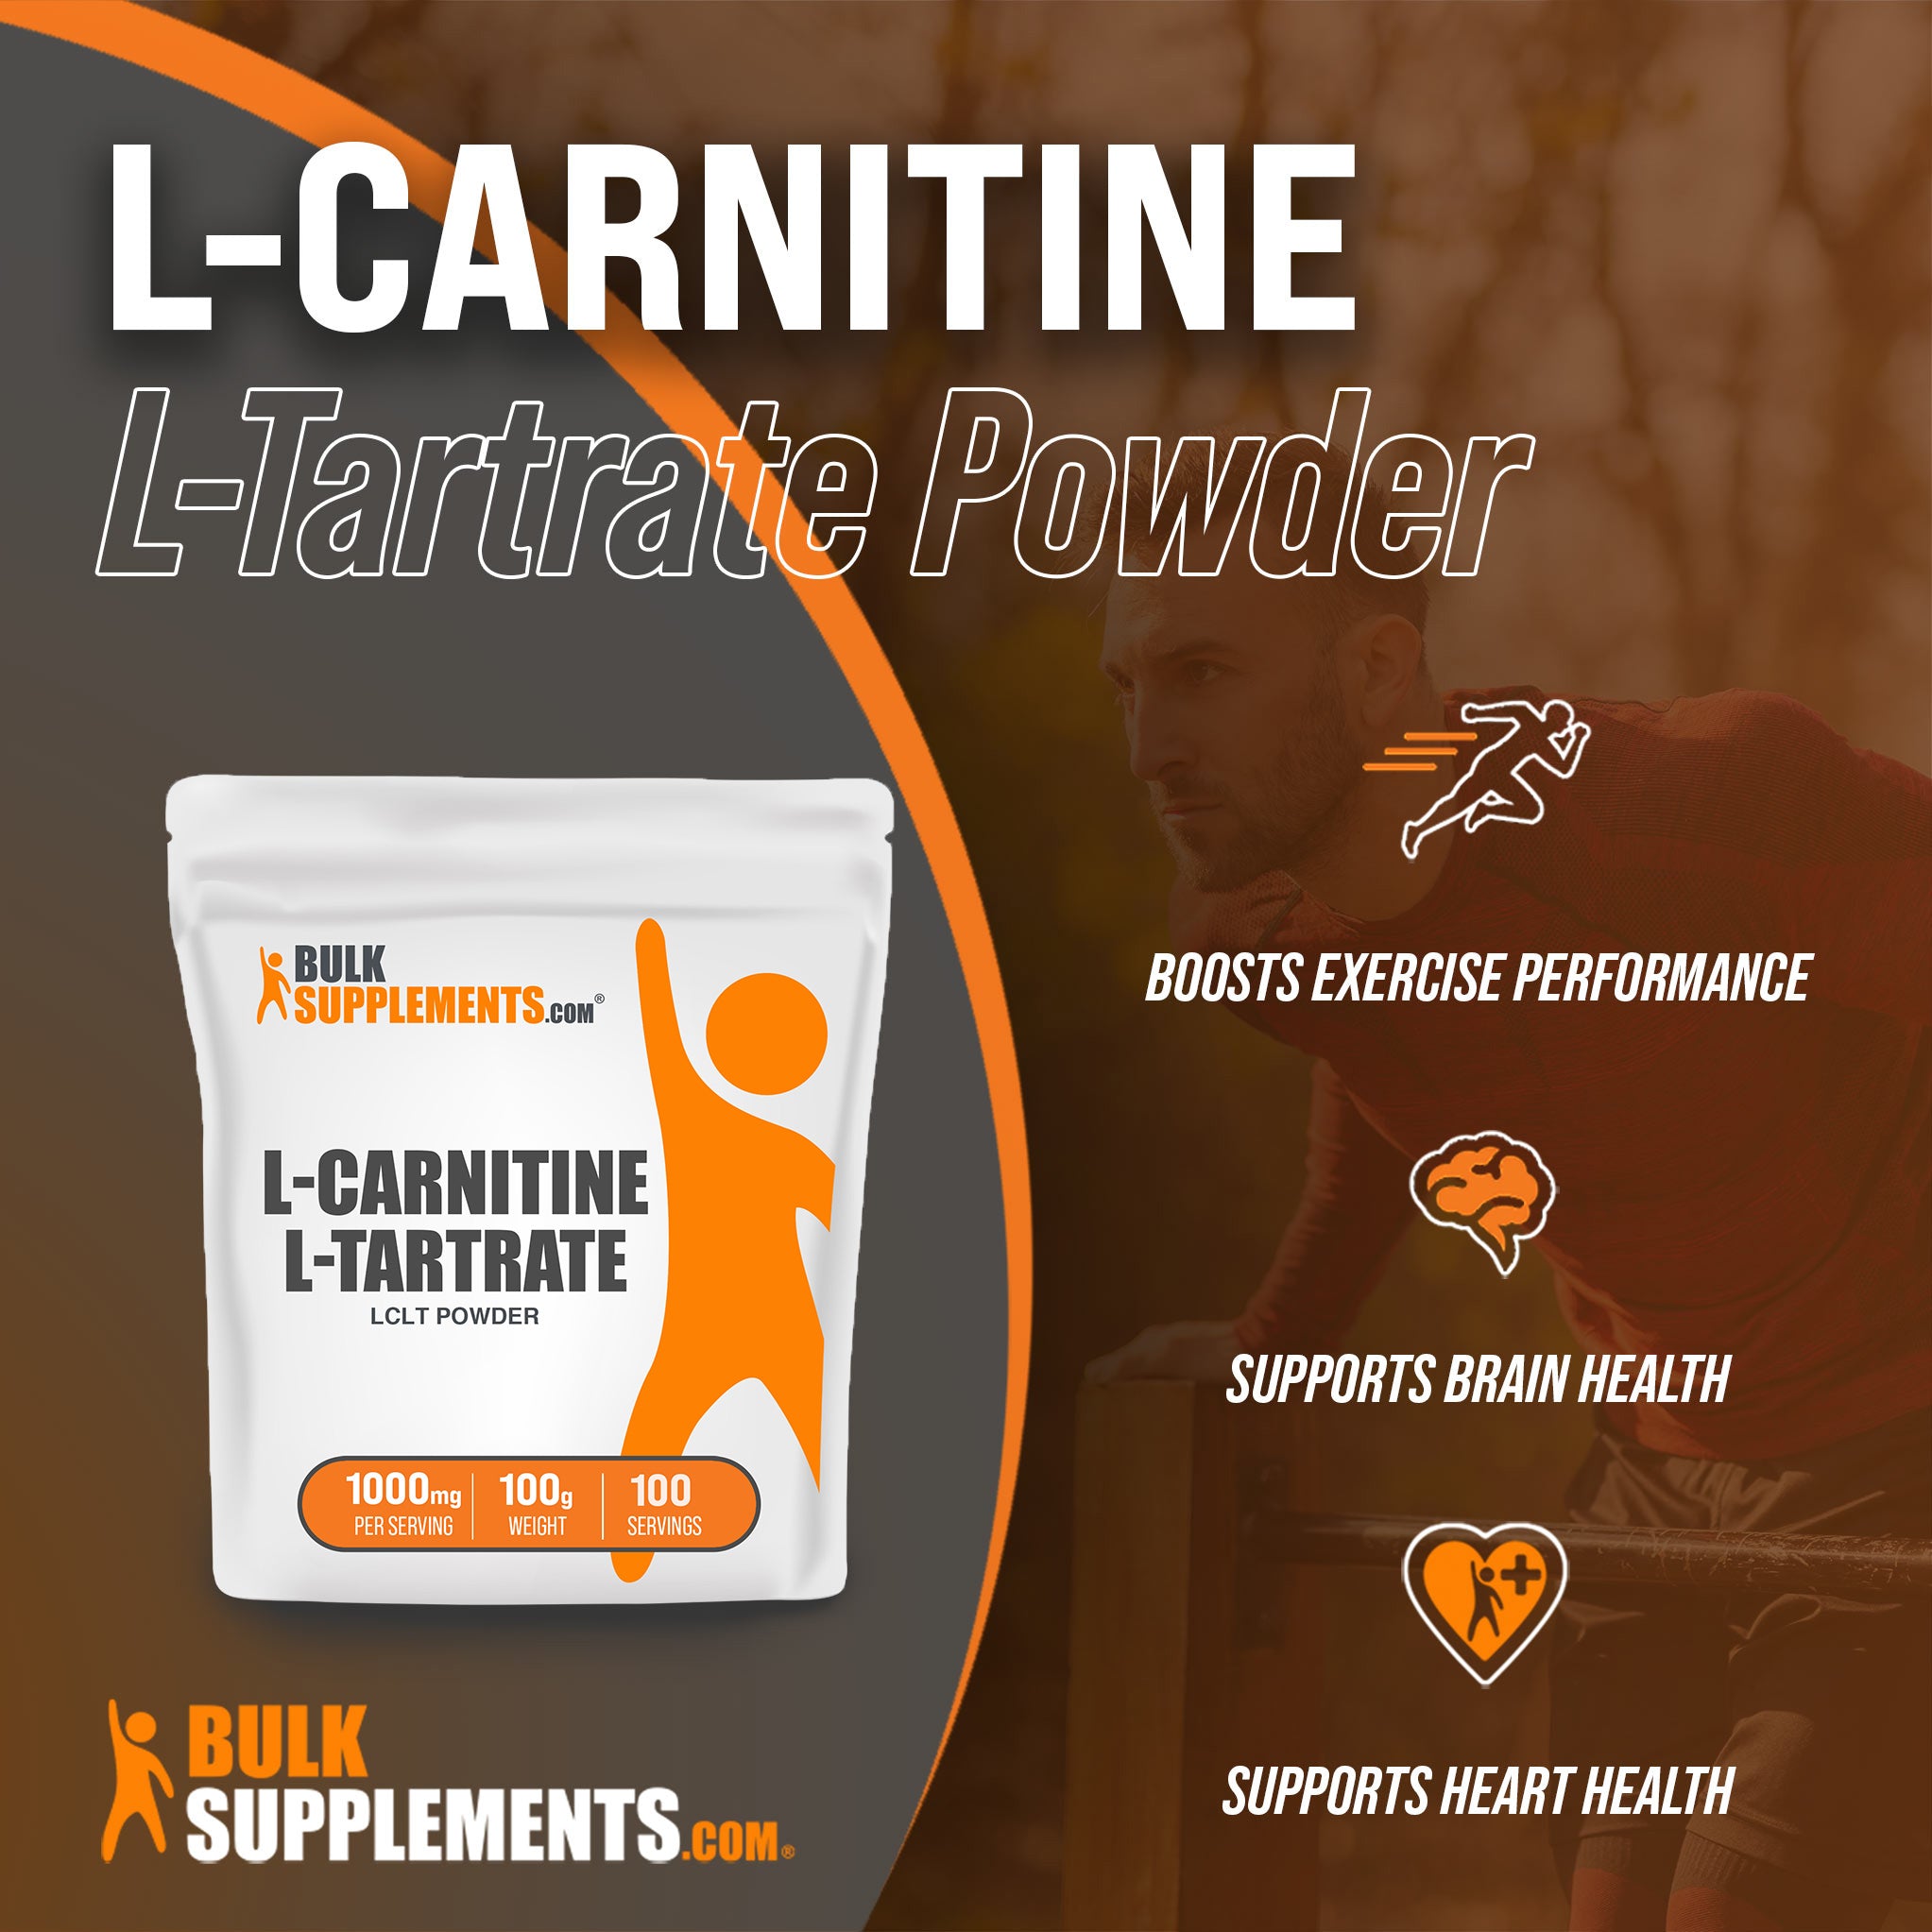 Benefits of L-Carnitine L-Tartrate: boosts exercise performance, supports brain health, supports heart health